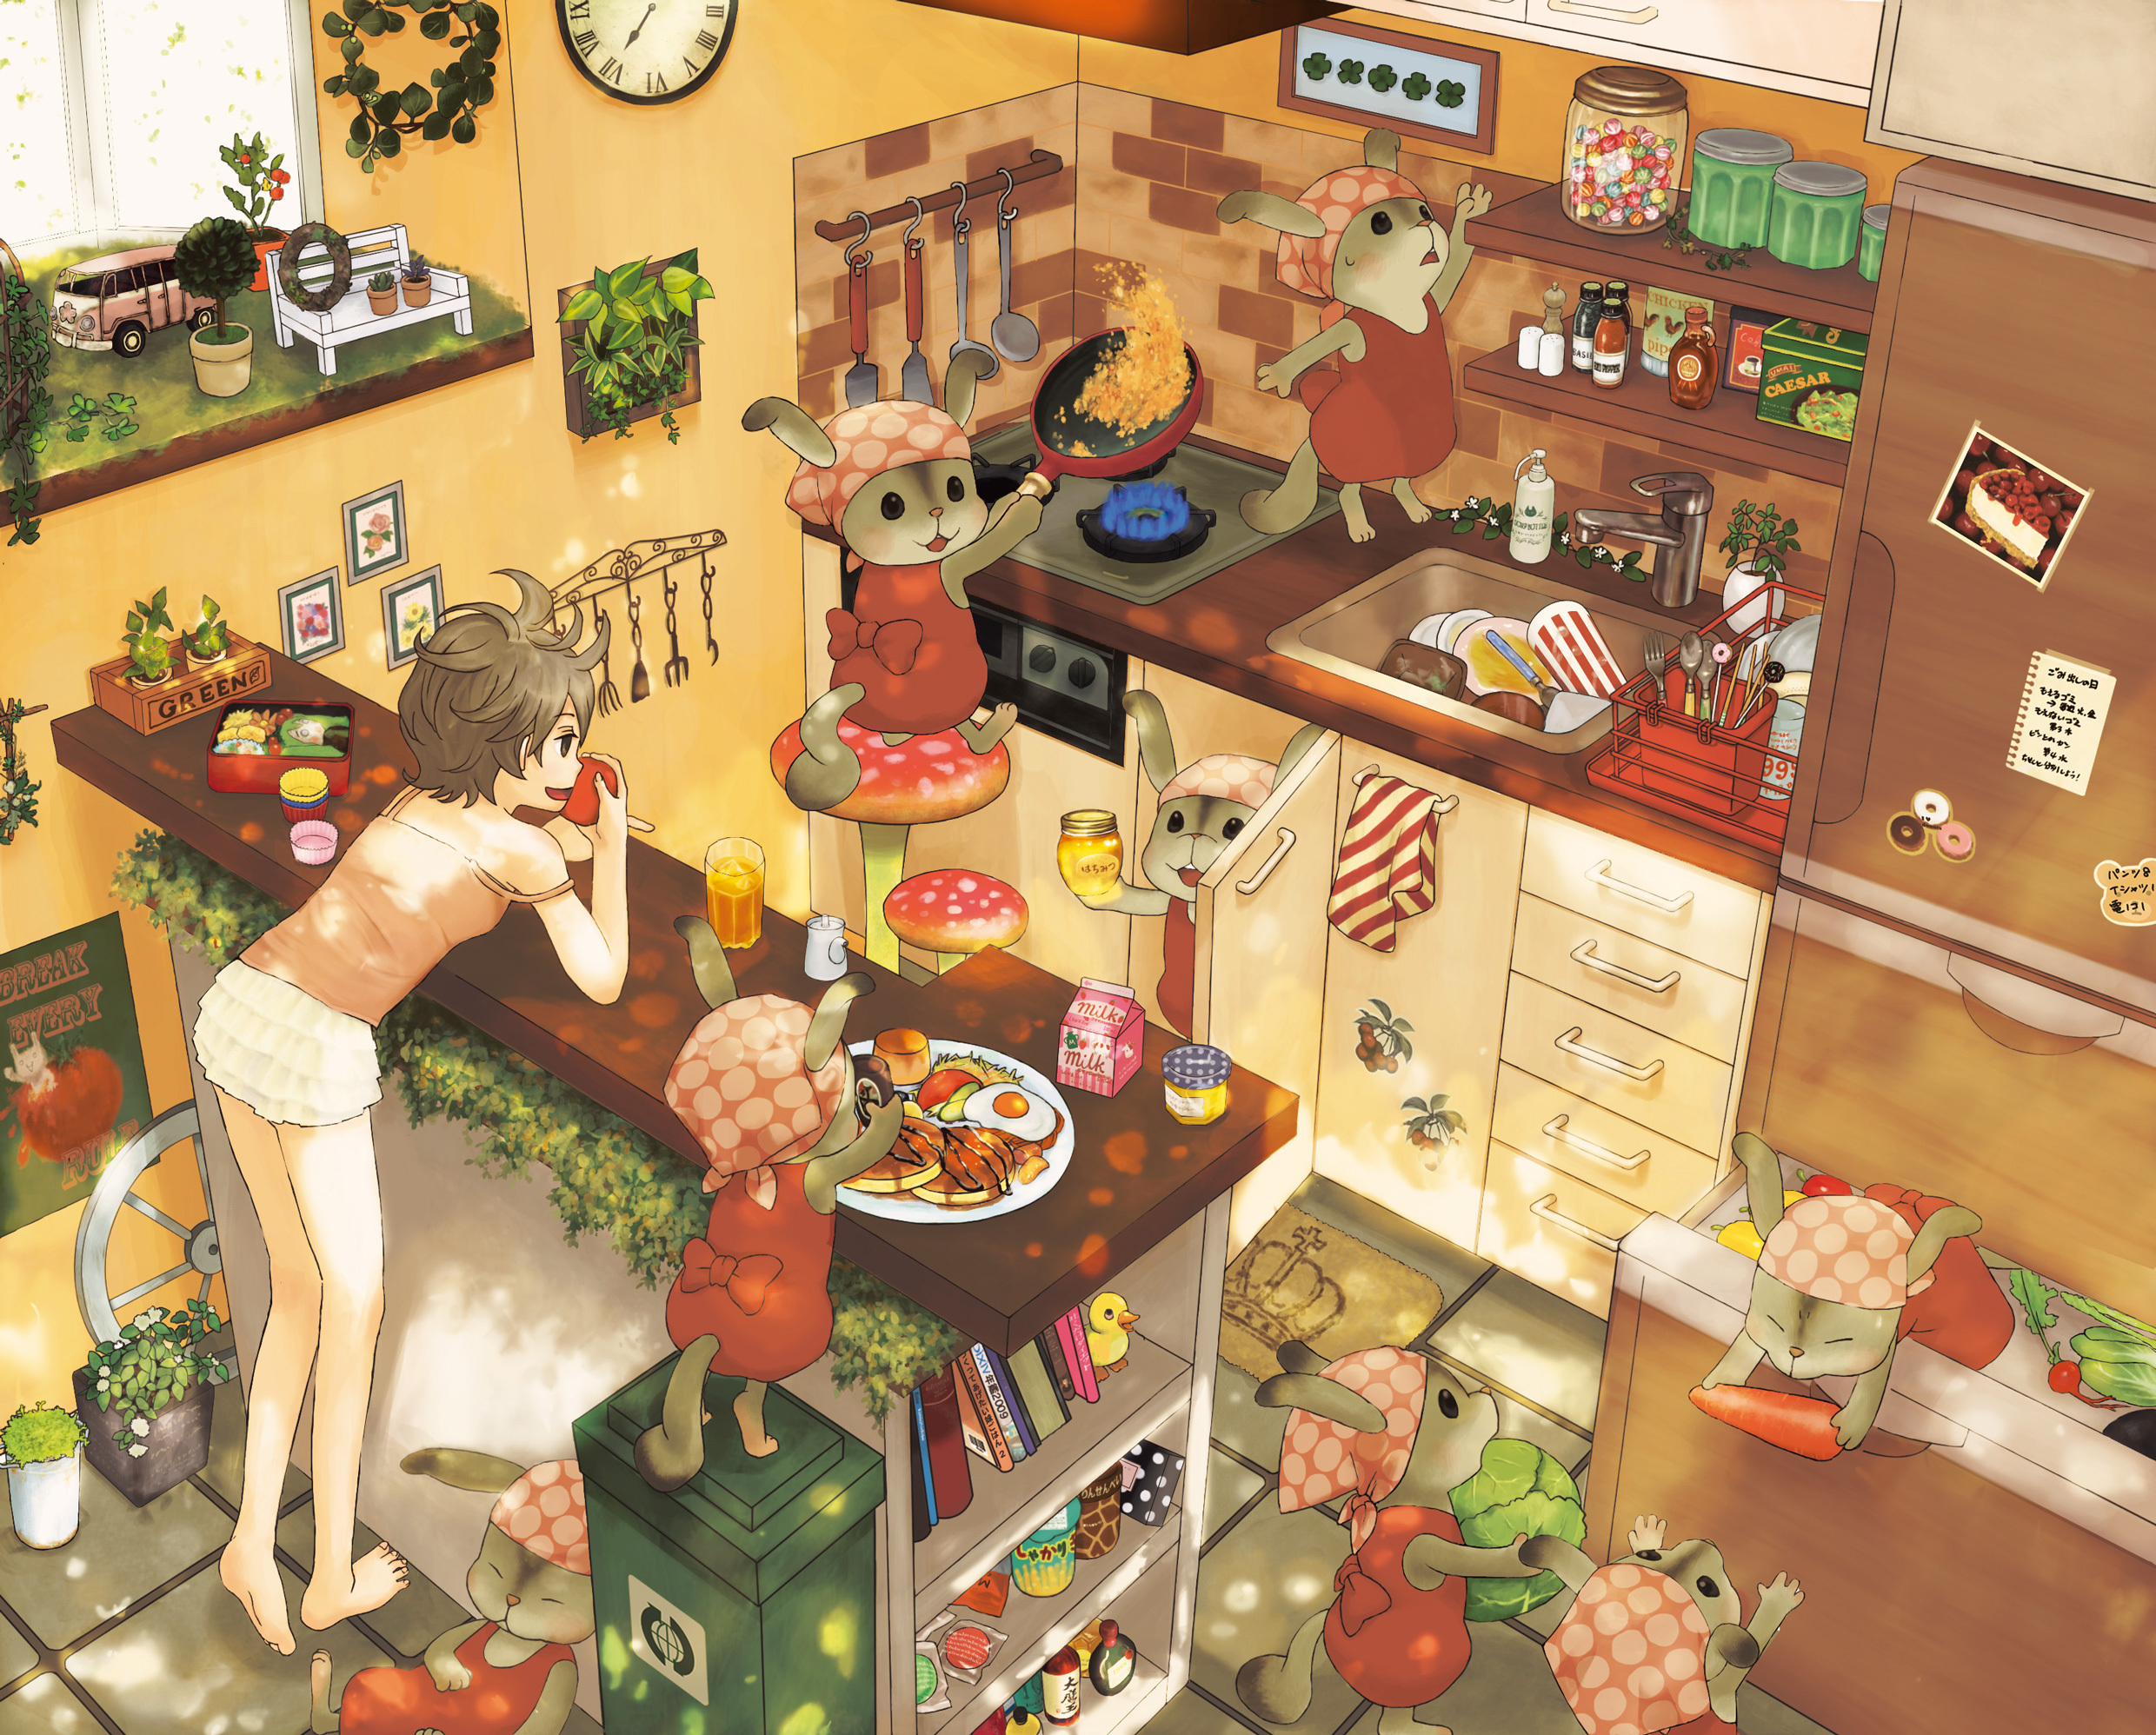 Anime 2480x1996 anime anime girls original characters tiles animals tile floor indoors women indoors plates plants eggs pancakes mushroom cabinets clocks sink open mouth short hair off shoulder window barefoot bandeau top cabbage carrots carpet drinking glass honey milk fork spoon cup duck smiling silverware shelves kitchen leaves jar fridge cooking messy hair syrup Roman numerals bench Cheesecake